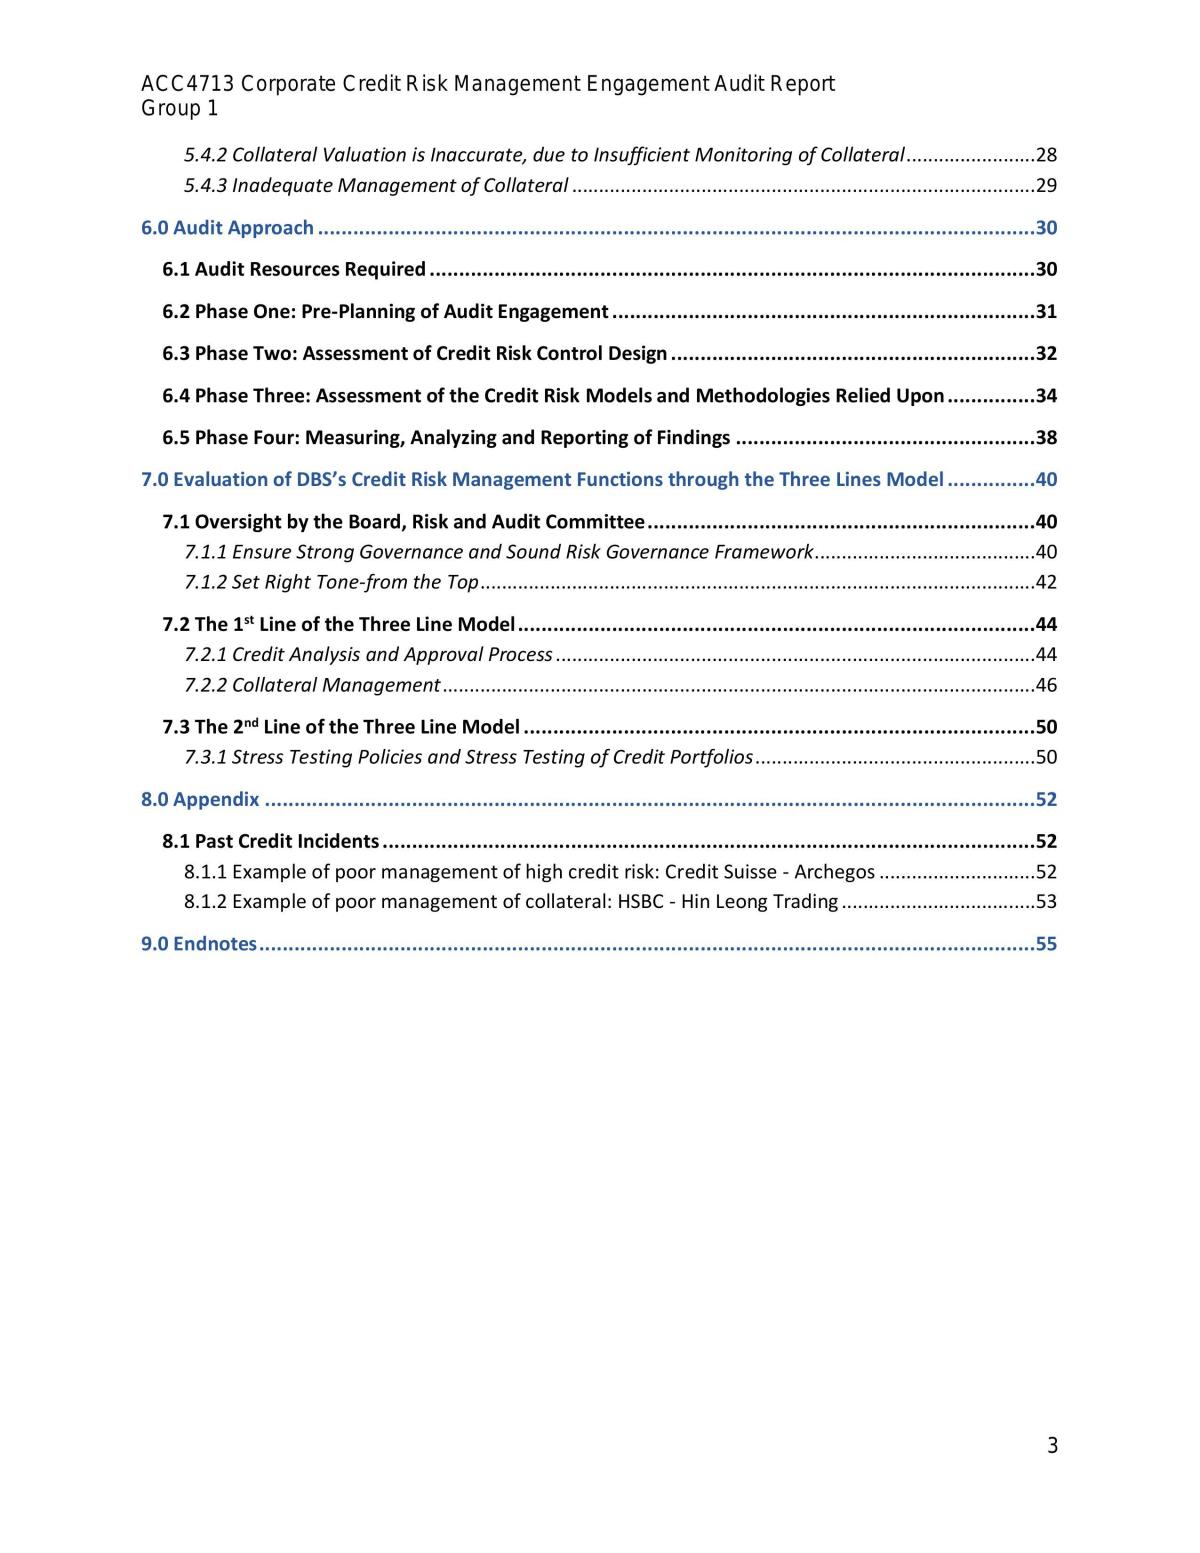 Corporate Credit Risk Management - Page 3